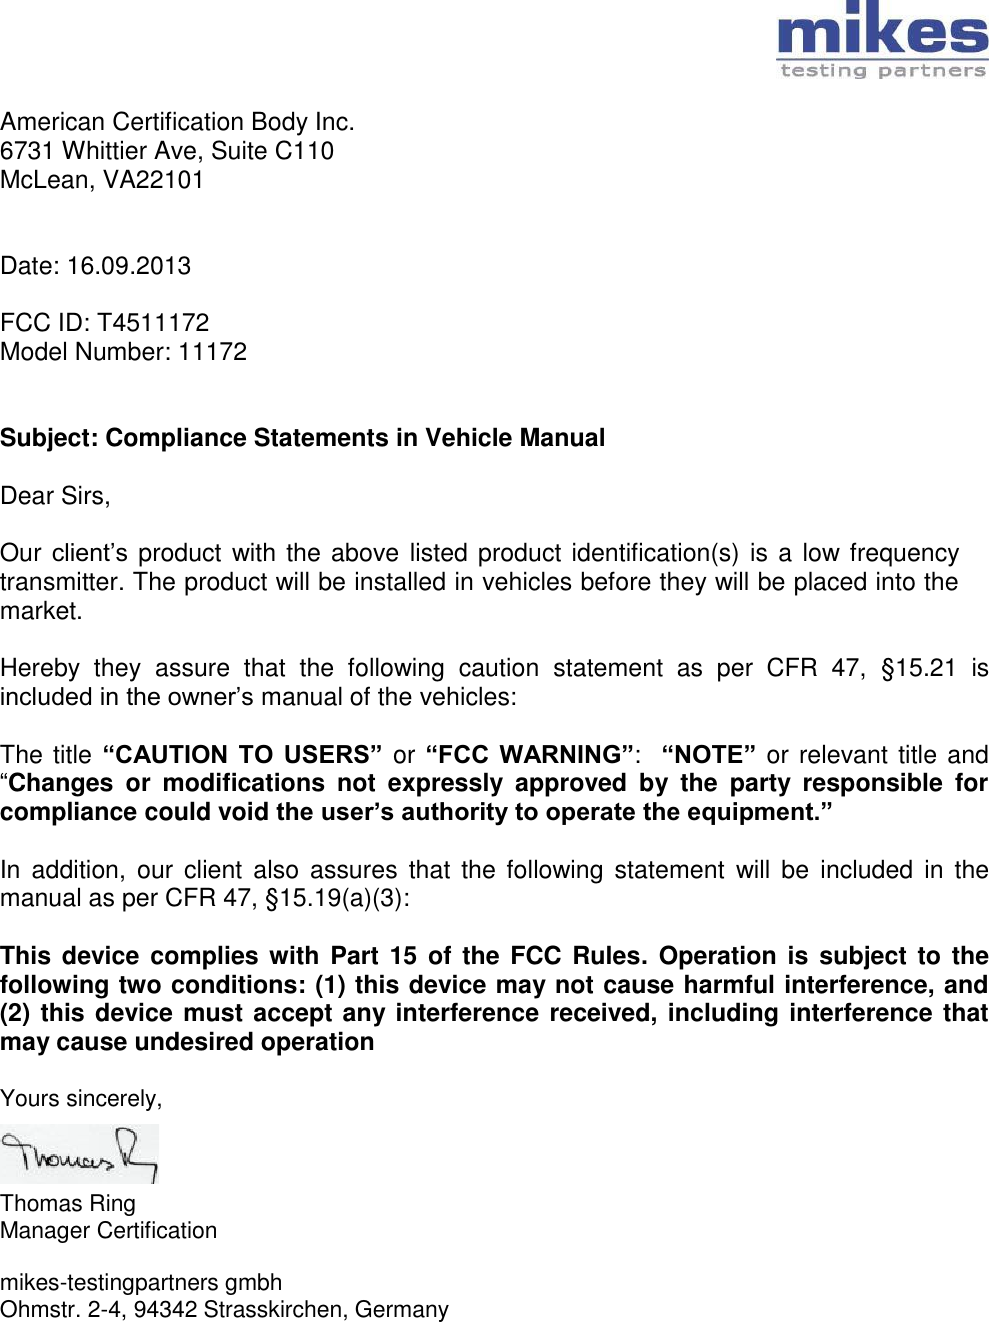   American Certification Body Inc. 6731 Whittier Ave, Suite C110 McLean, VA22101   Date: 16.09.2013  FCC ID: T4511172 Model Number: 11172   Subject: Compliance Statements in Vehicle Manual  Dear Sirs,  Our client’s  product with the above listed product identification(s) is a low frequency transmitter. The product will be installed in vehicles before they will be placed into the market.  Hereby  they  assure  that  the  following  caution  statement  as  per  CFR  47,  §15.21  is included in the owner’s manual of the vehicles:  The title “CAUTION  TO  USERS” or “FCC  WARNING”:  “NOTE” or relevant title and “Changes  or  modifications  not  expressly  approved  by  the  party  responsible  for compliance could void the user’s authority to operate the equipment.”   In  addition, our  client also  assures  that  the following  statement  will  be  included  in the manual as per CFR 47, §15.19(a)(3):  This device  complies with  Part 15  of the FCC  Rules. Operation is  subject to the following two conditions: (1) this device may not cause harmful interference, and (2) this device must accept any interference received, including interference that may cause undesired operation  Yours sincerely,    Thomas Ring Manager Certification  mikes-testingpartners gmbh Ohmstr. 2-4, 94342 Strasskirchen, Germany 